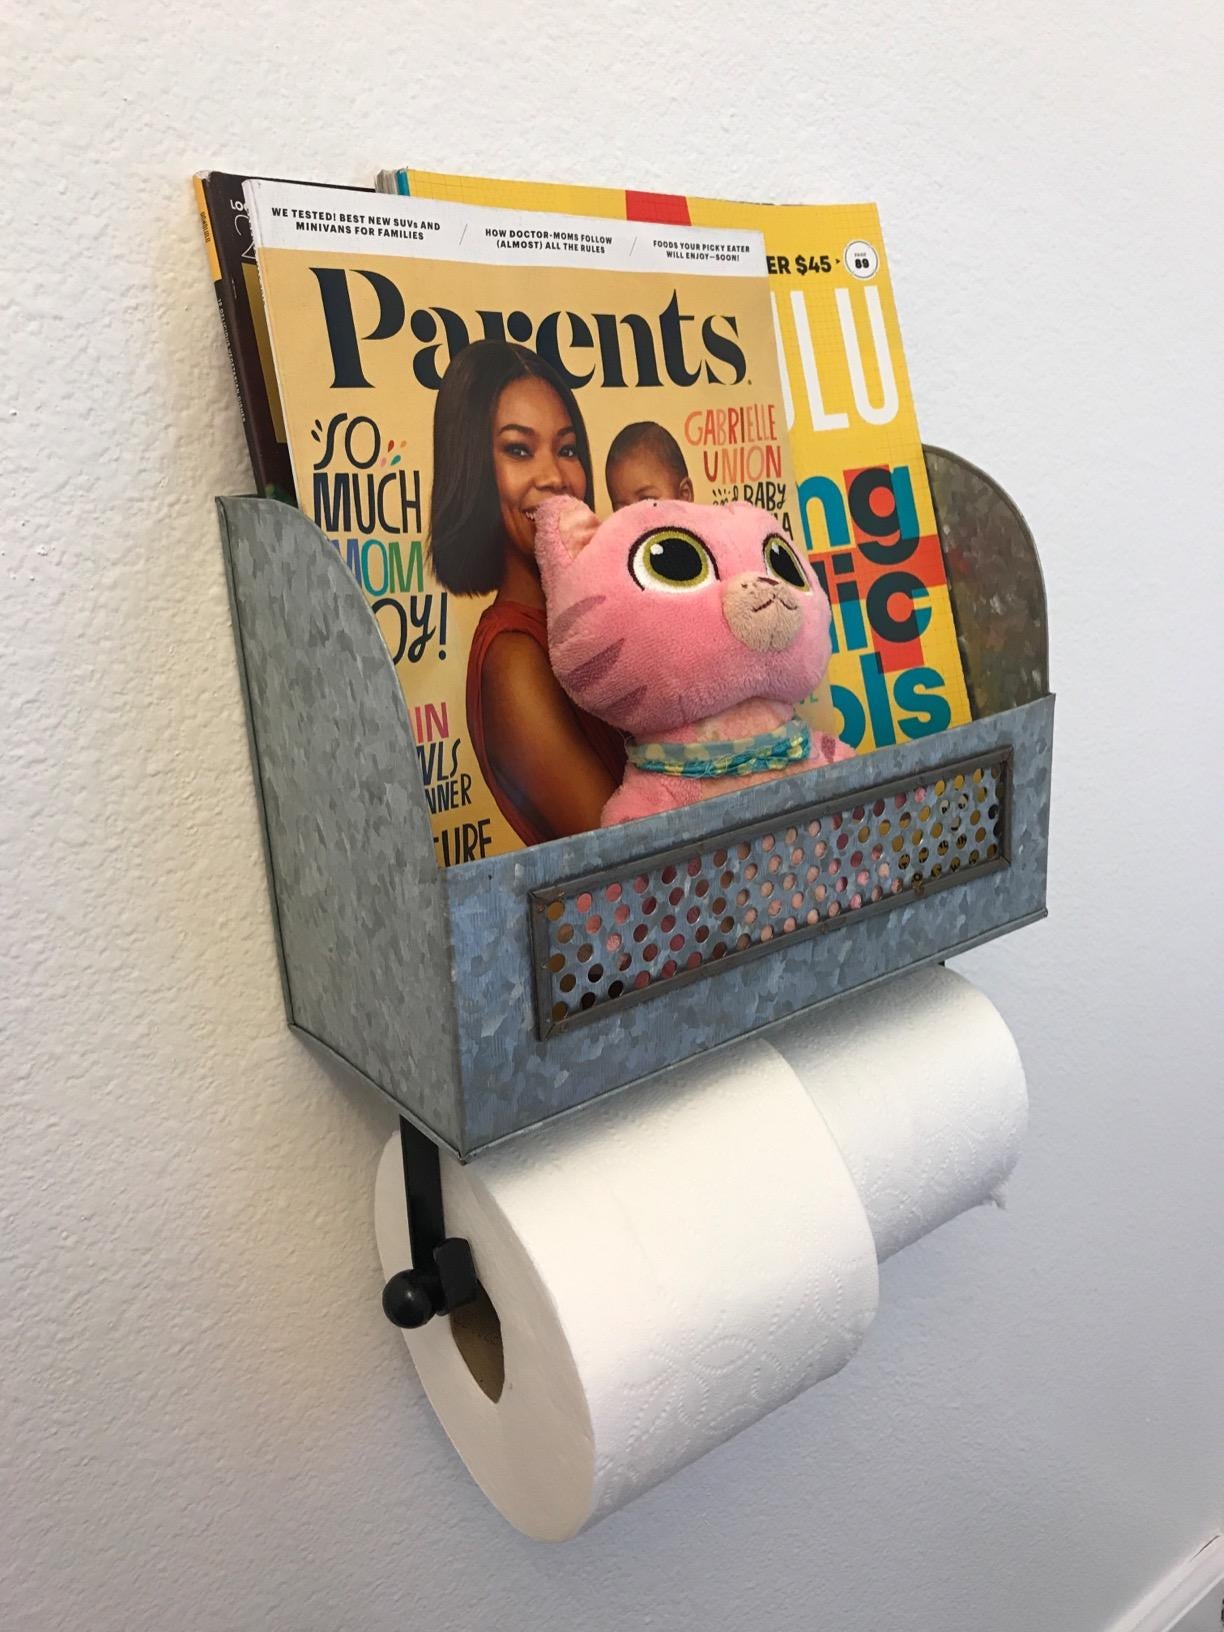 the galvanized toilet roll holder mounted on reviewer's bathroom wall